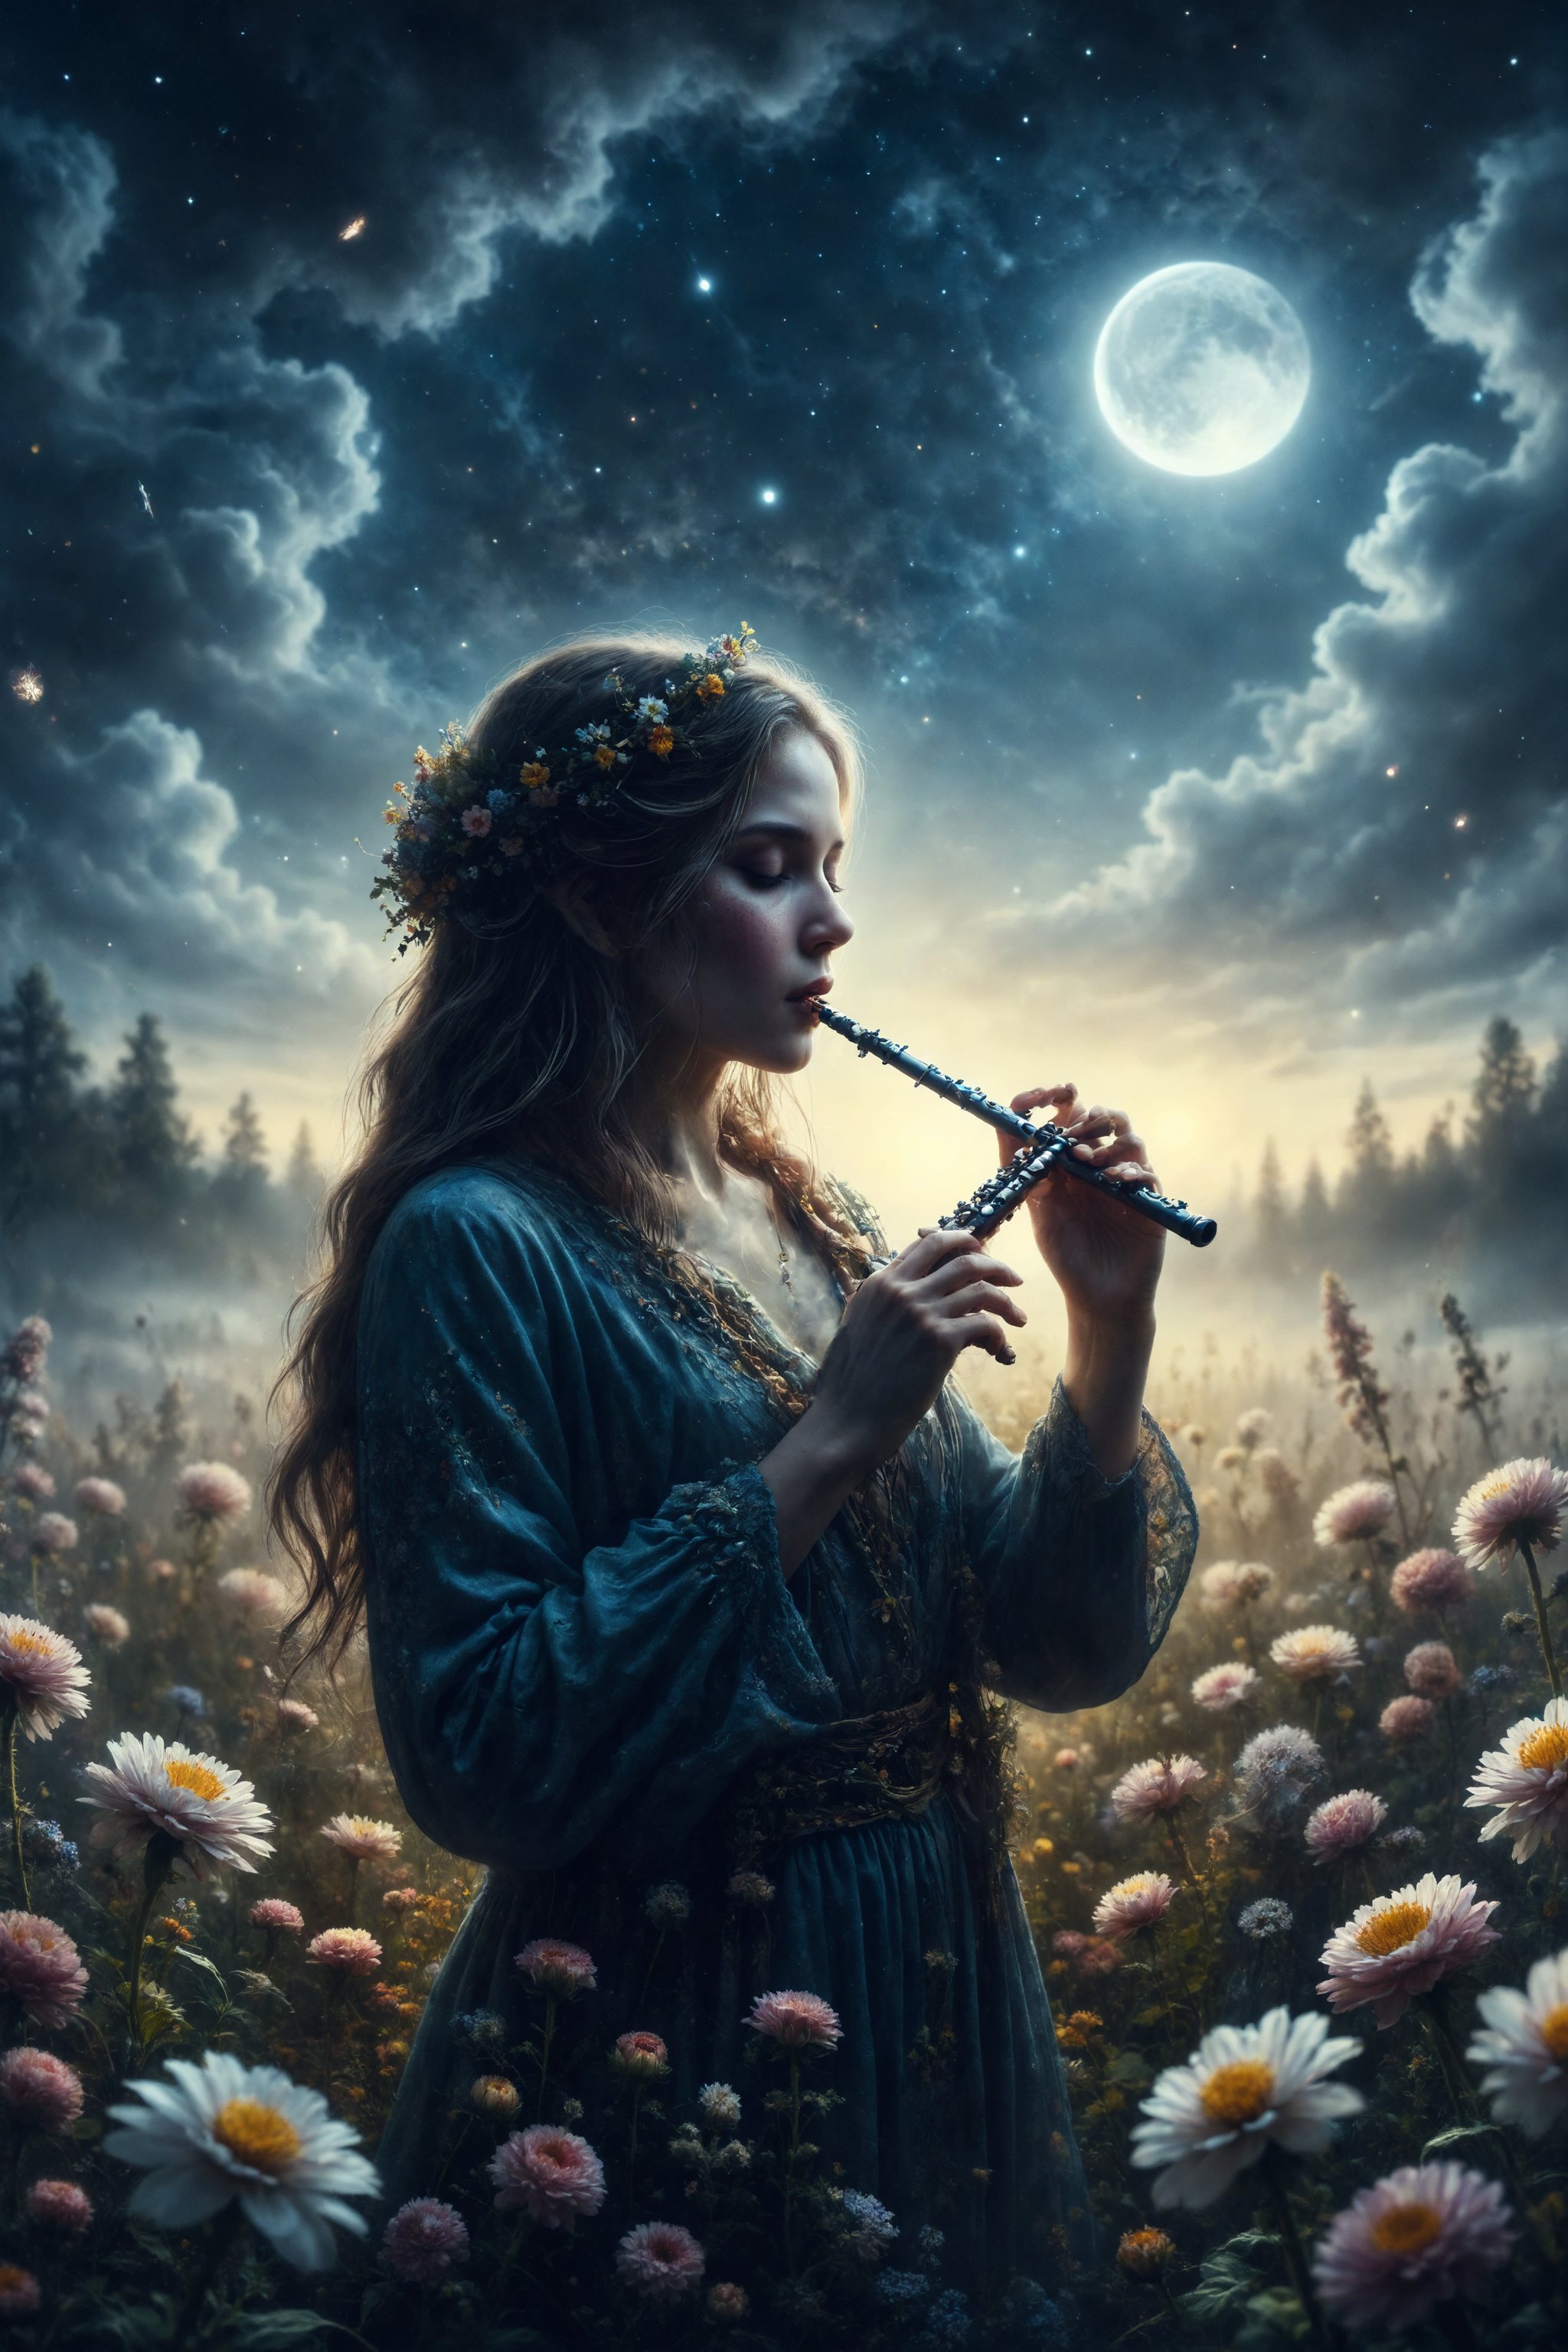 Create an illustration of a mistycal criature playing a flute in a field of moonlit flowers.